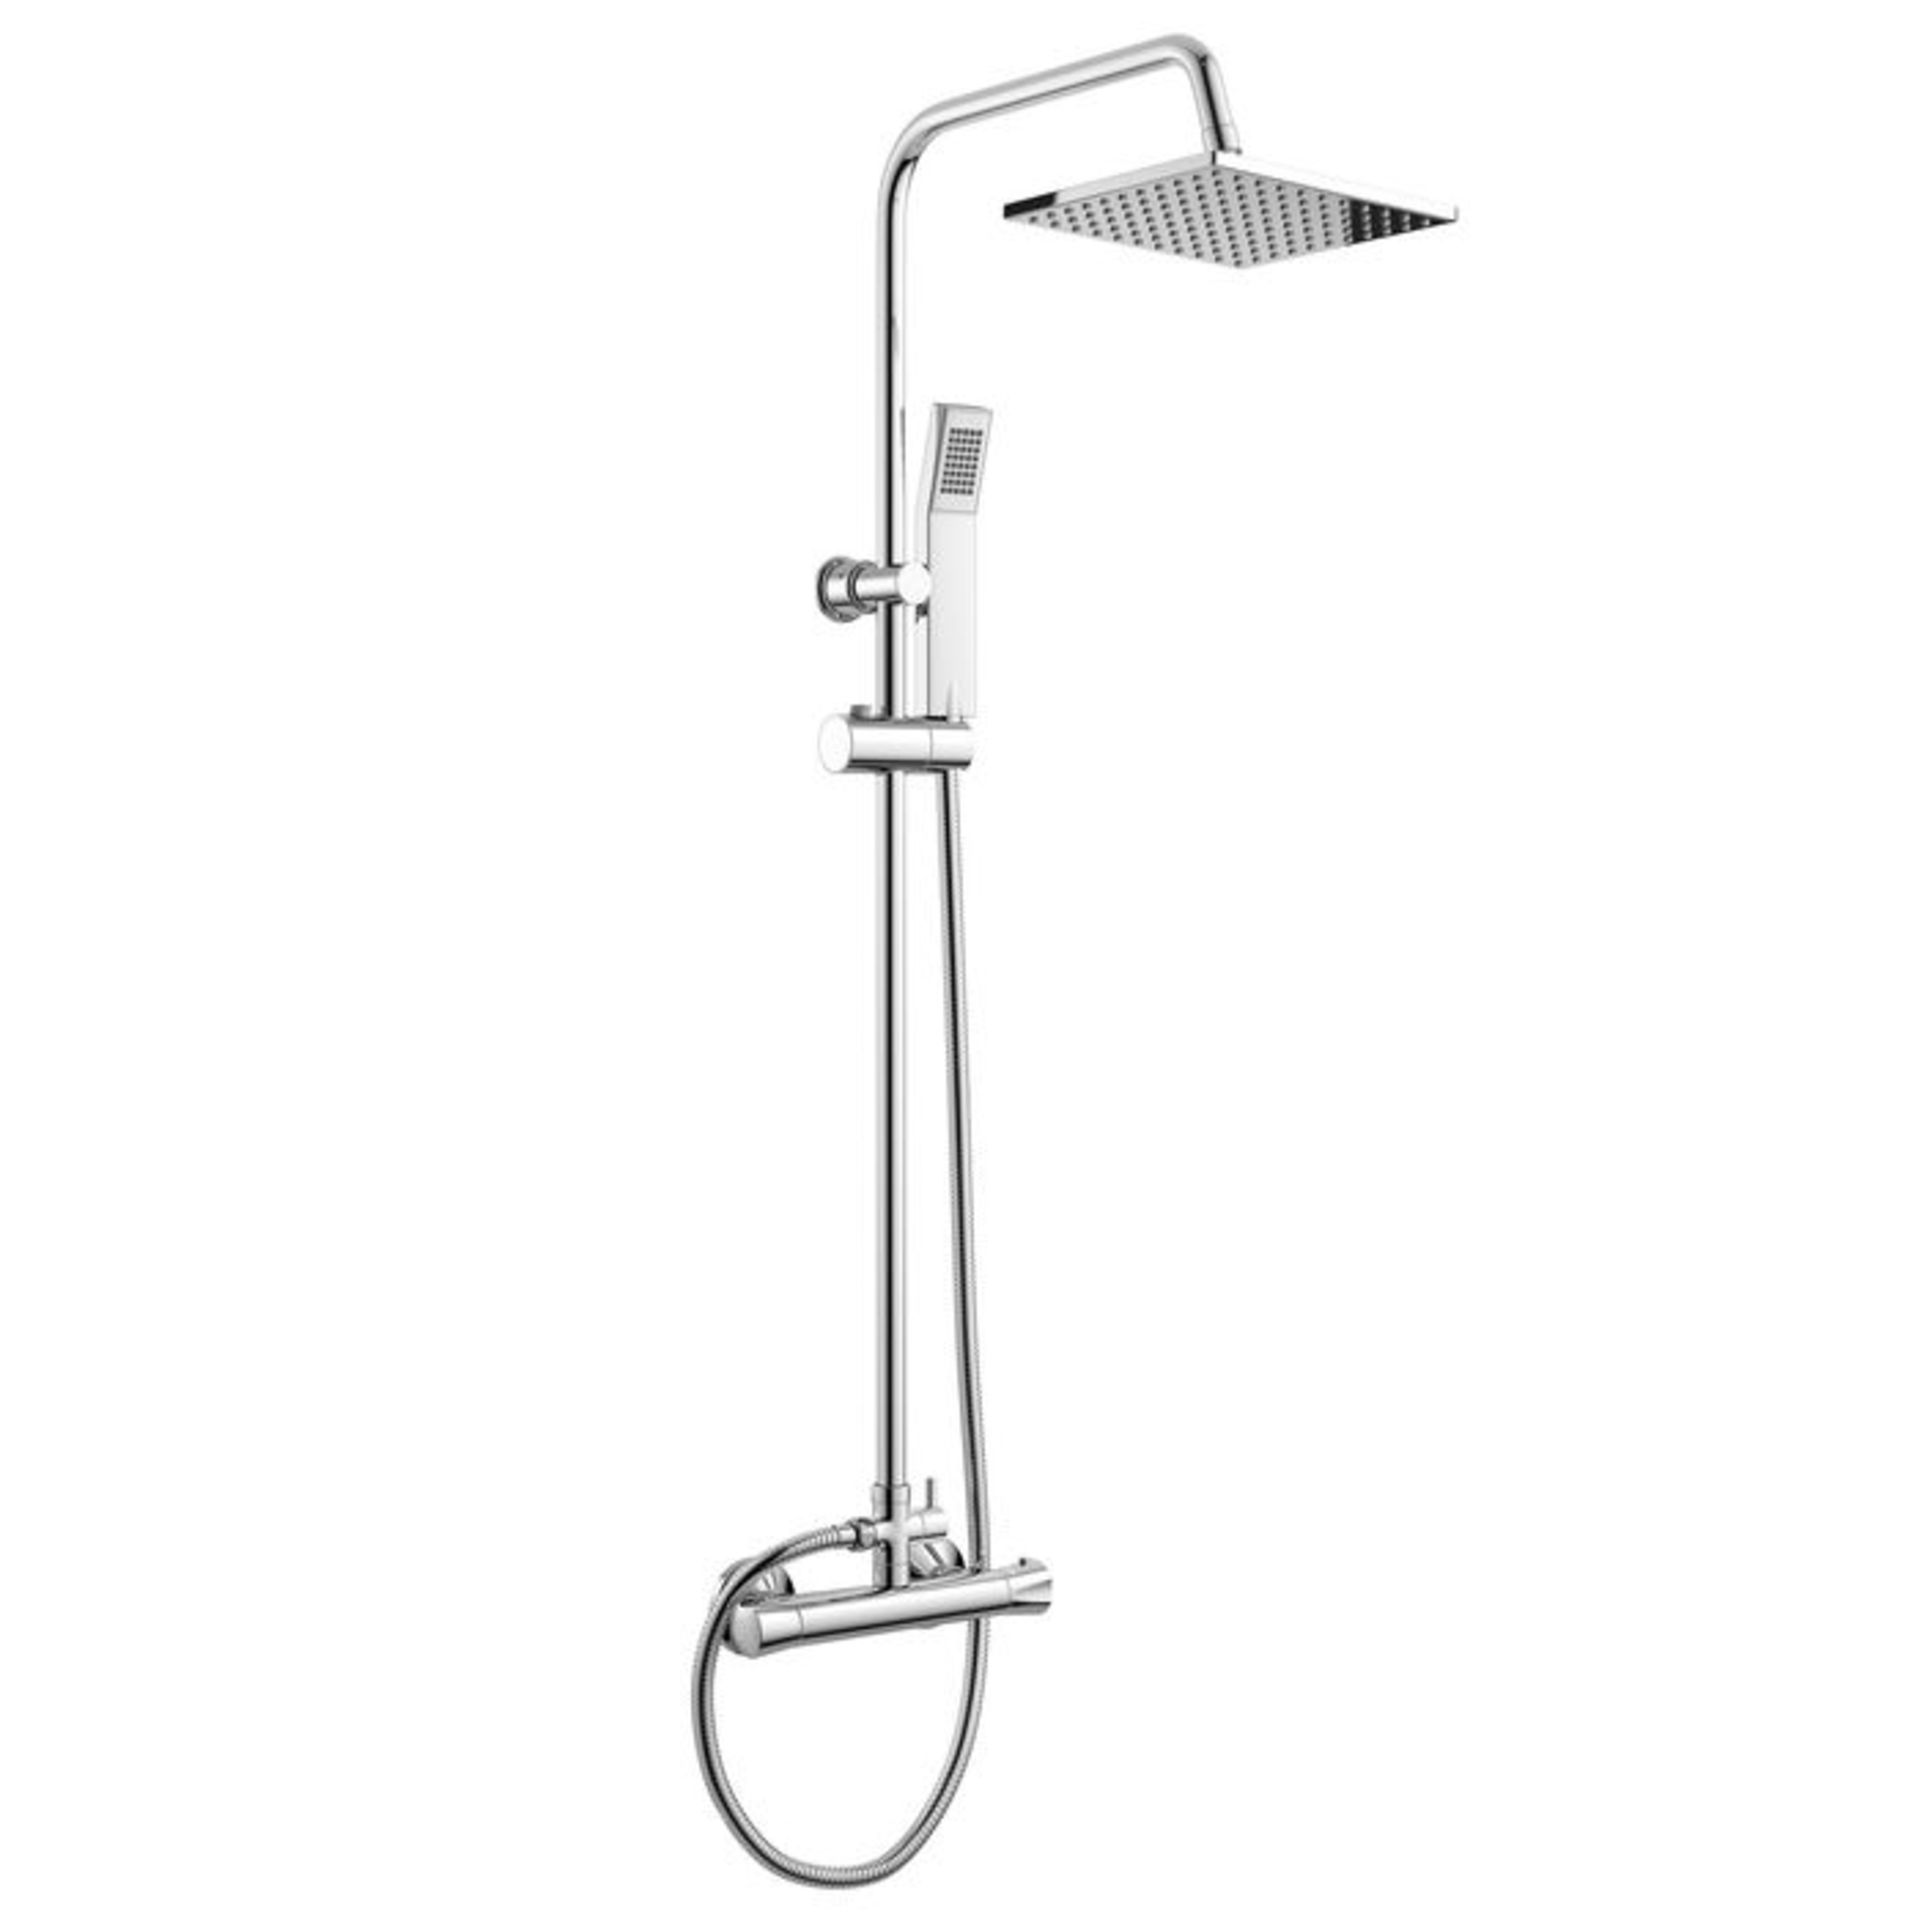 (AZ36) Square Exposed Thermostatic Shower Kit & Medium Head. Curved features and contemporary - Image 2 of 4